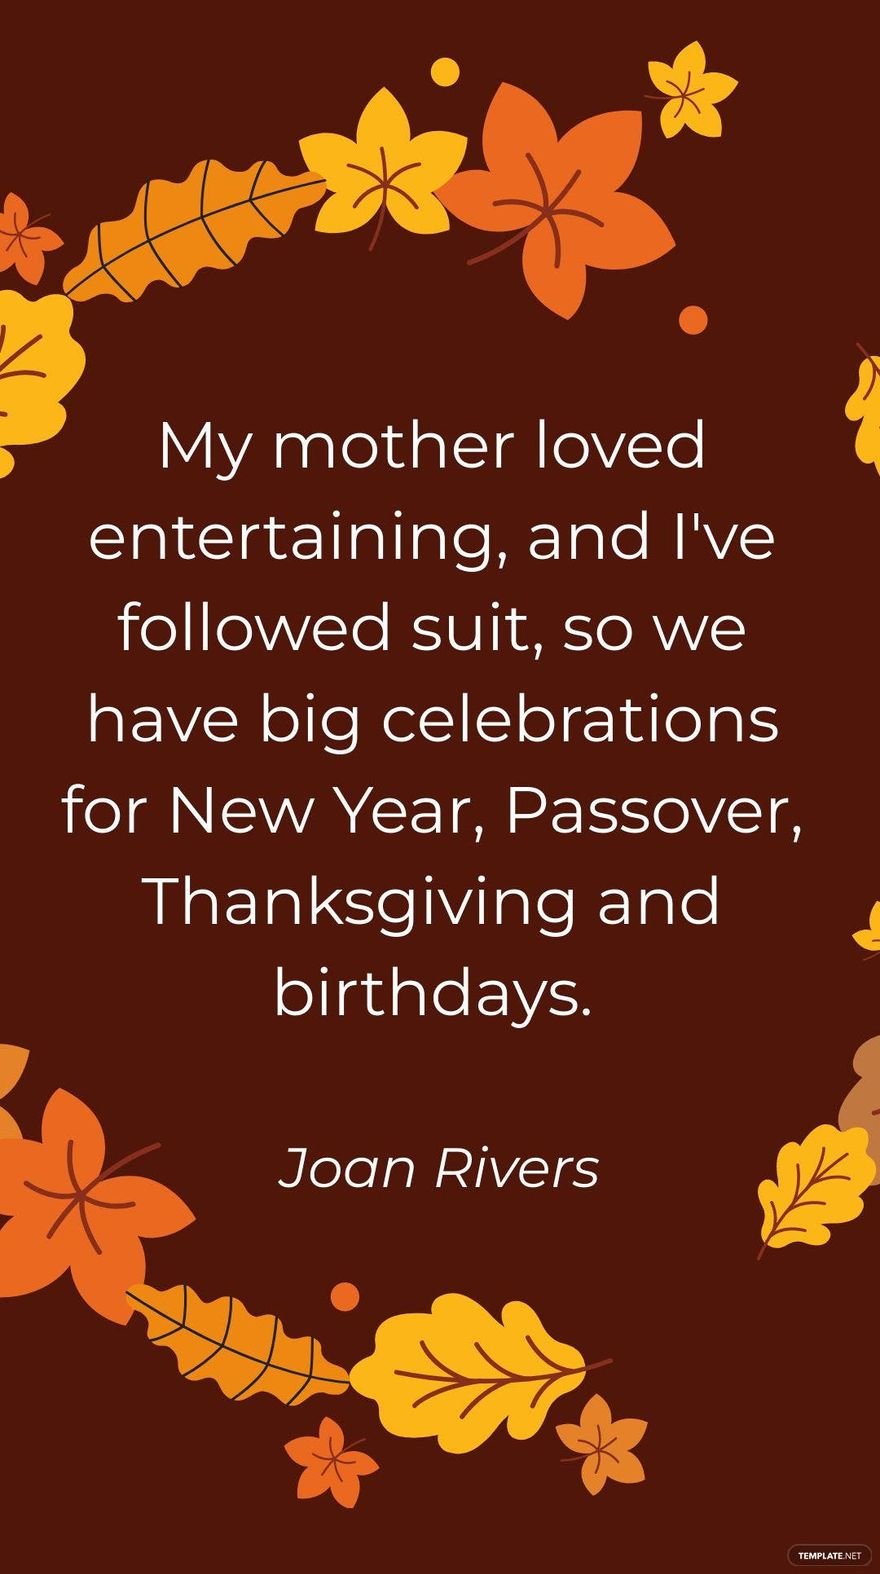 Joan Rivers - My mother loved entertaining, and I've followed suit, so we have big celebrations for New Year, Passover, Thanksgiving and birthdays.